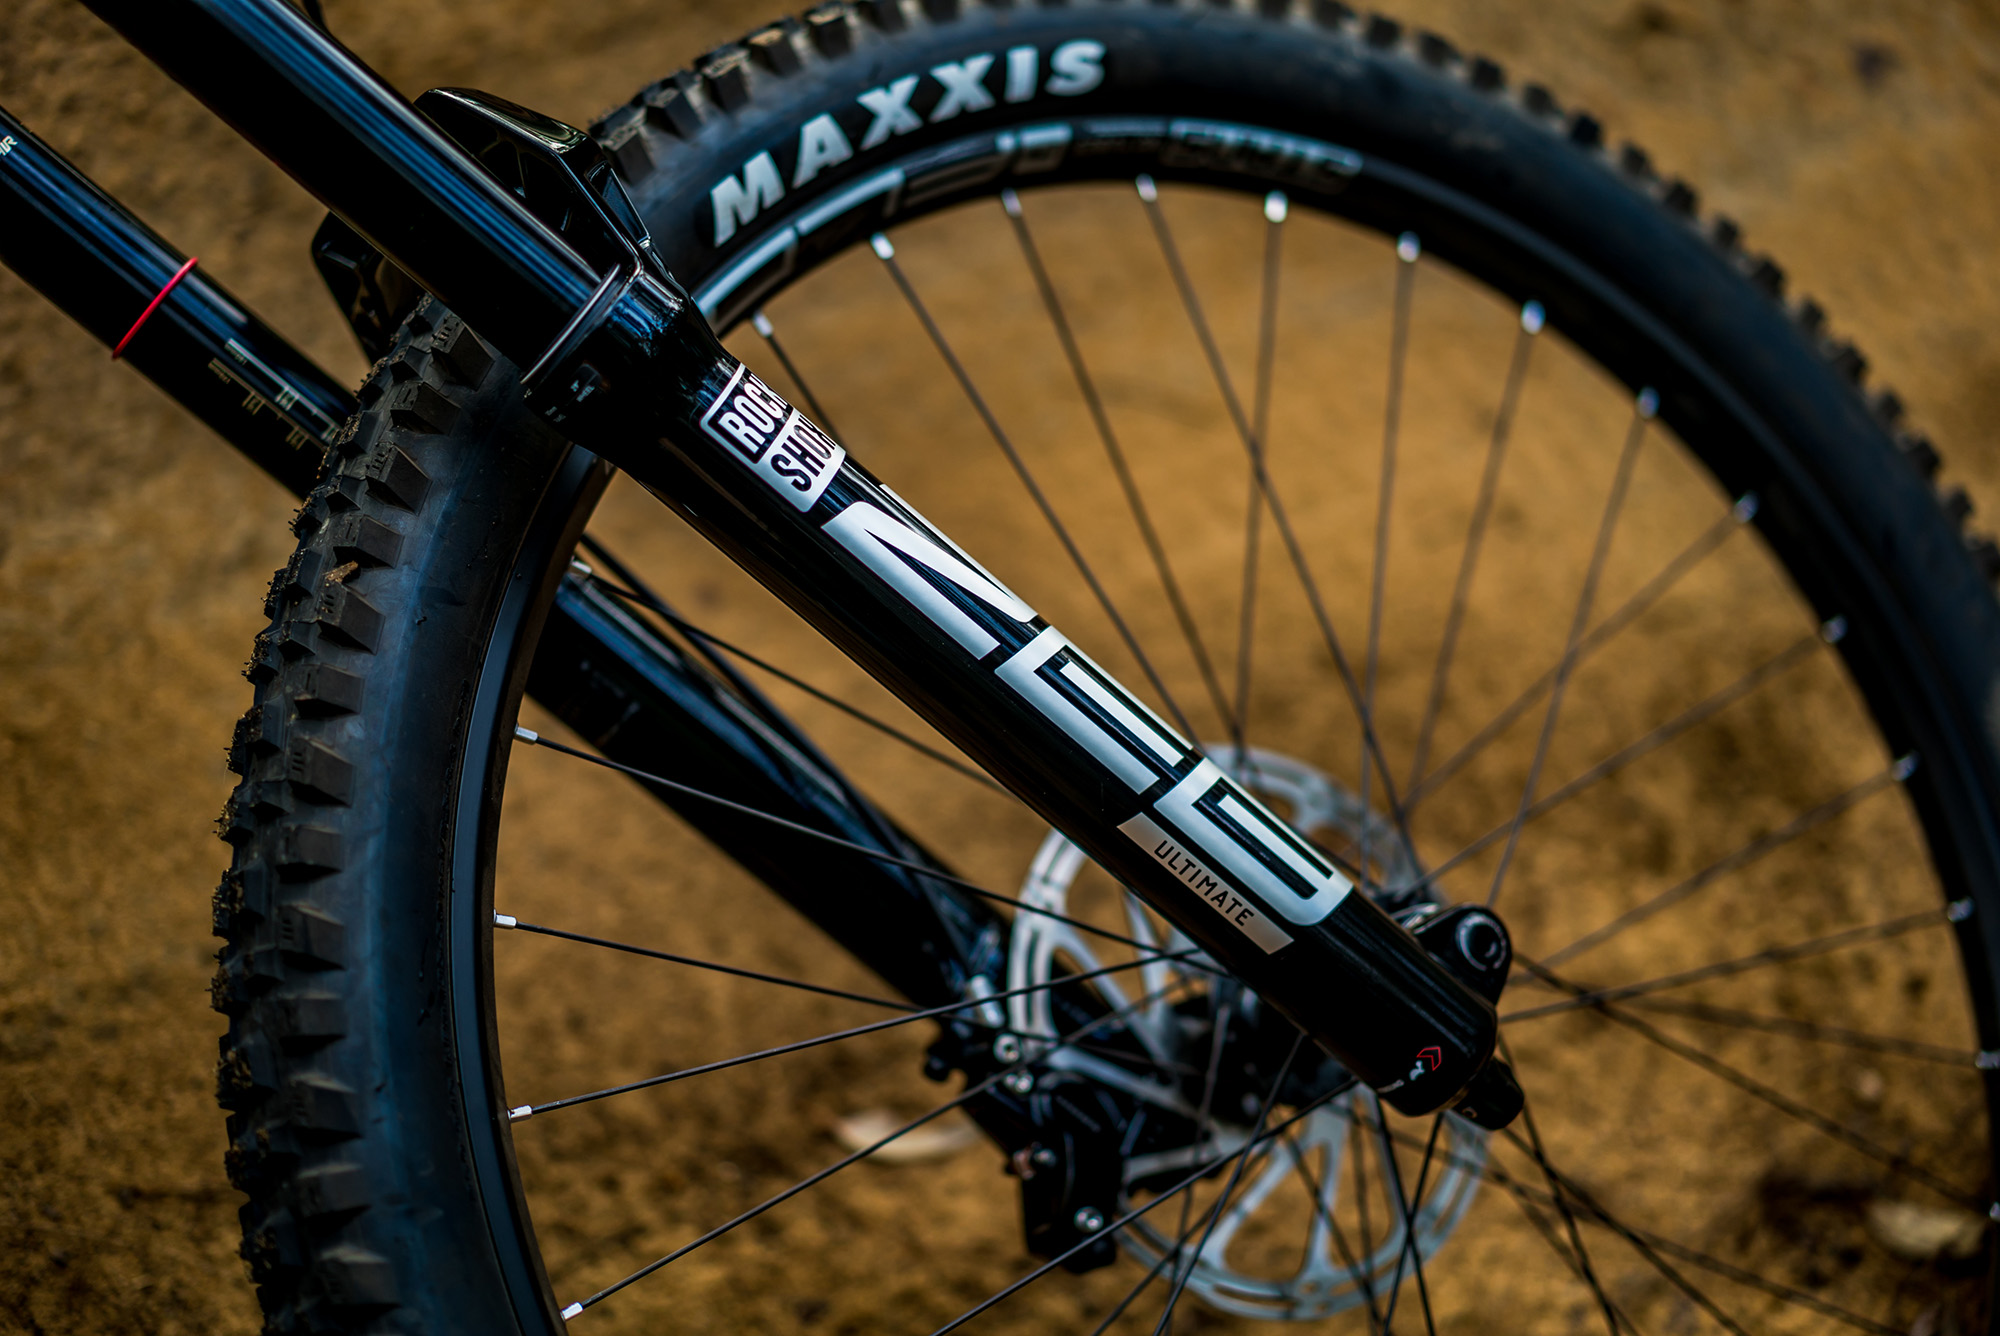 RockShox goes to 38mm with the new Zeb! [R]evolution MTB